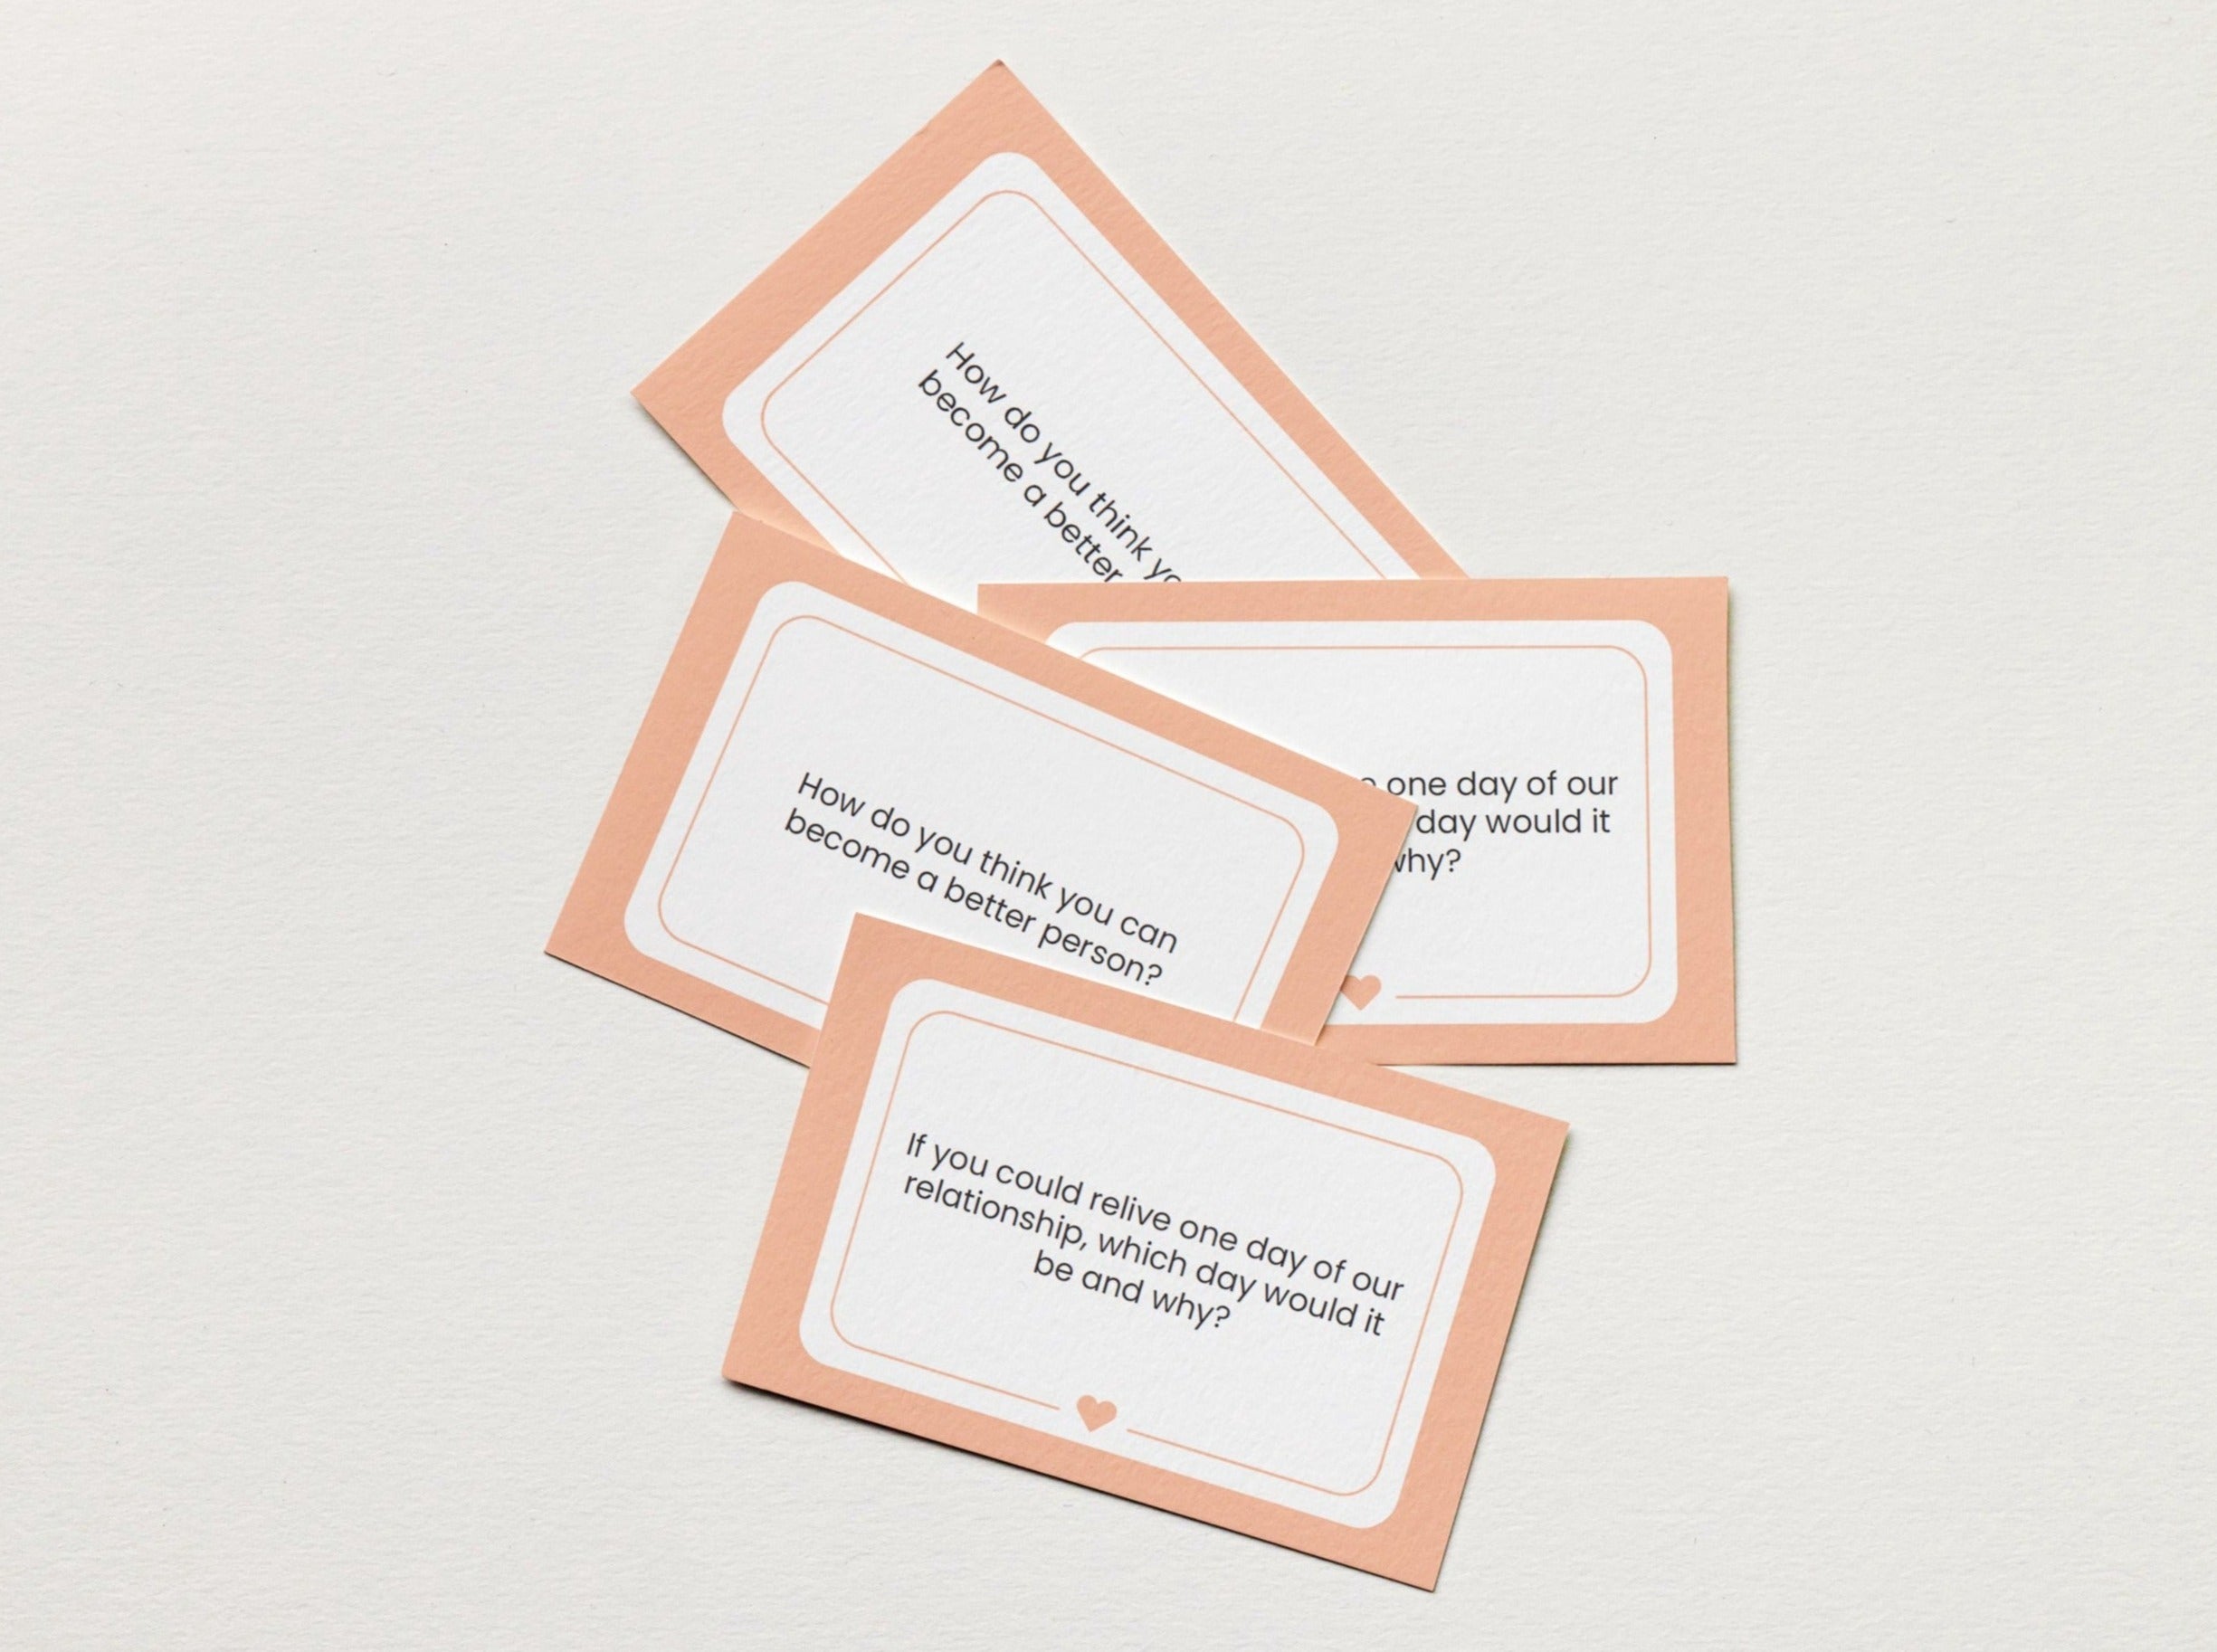 printable conversation cards for couples, digital download connection cards, relationship and dating questions to ask, connect with your partner, love and relationship advice, couples card games, card games to improve couples conversation, the relationship deck, couples question card deck, deep questions to ask your partner, improve date night, connect with your partner and improve communication